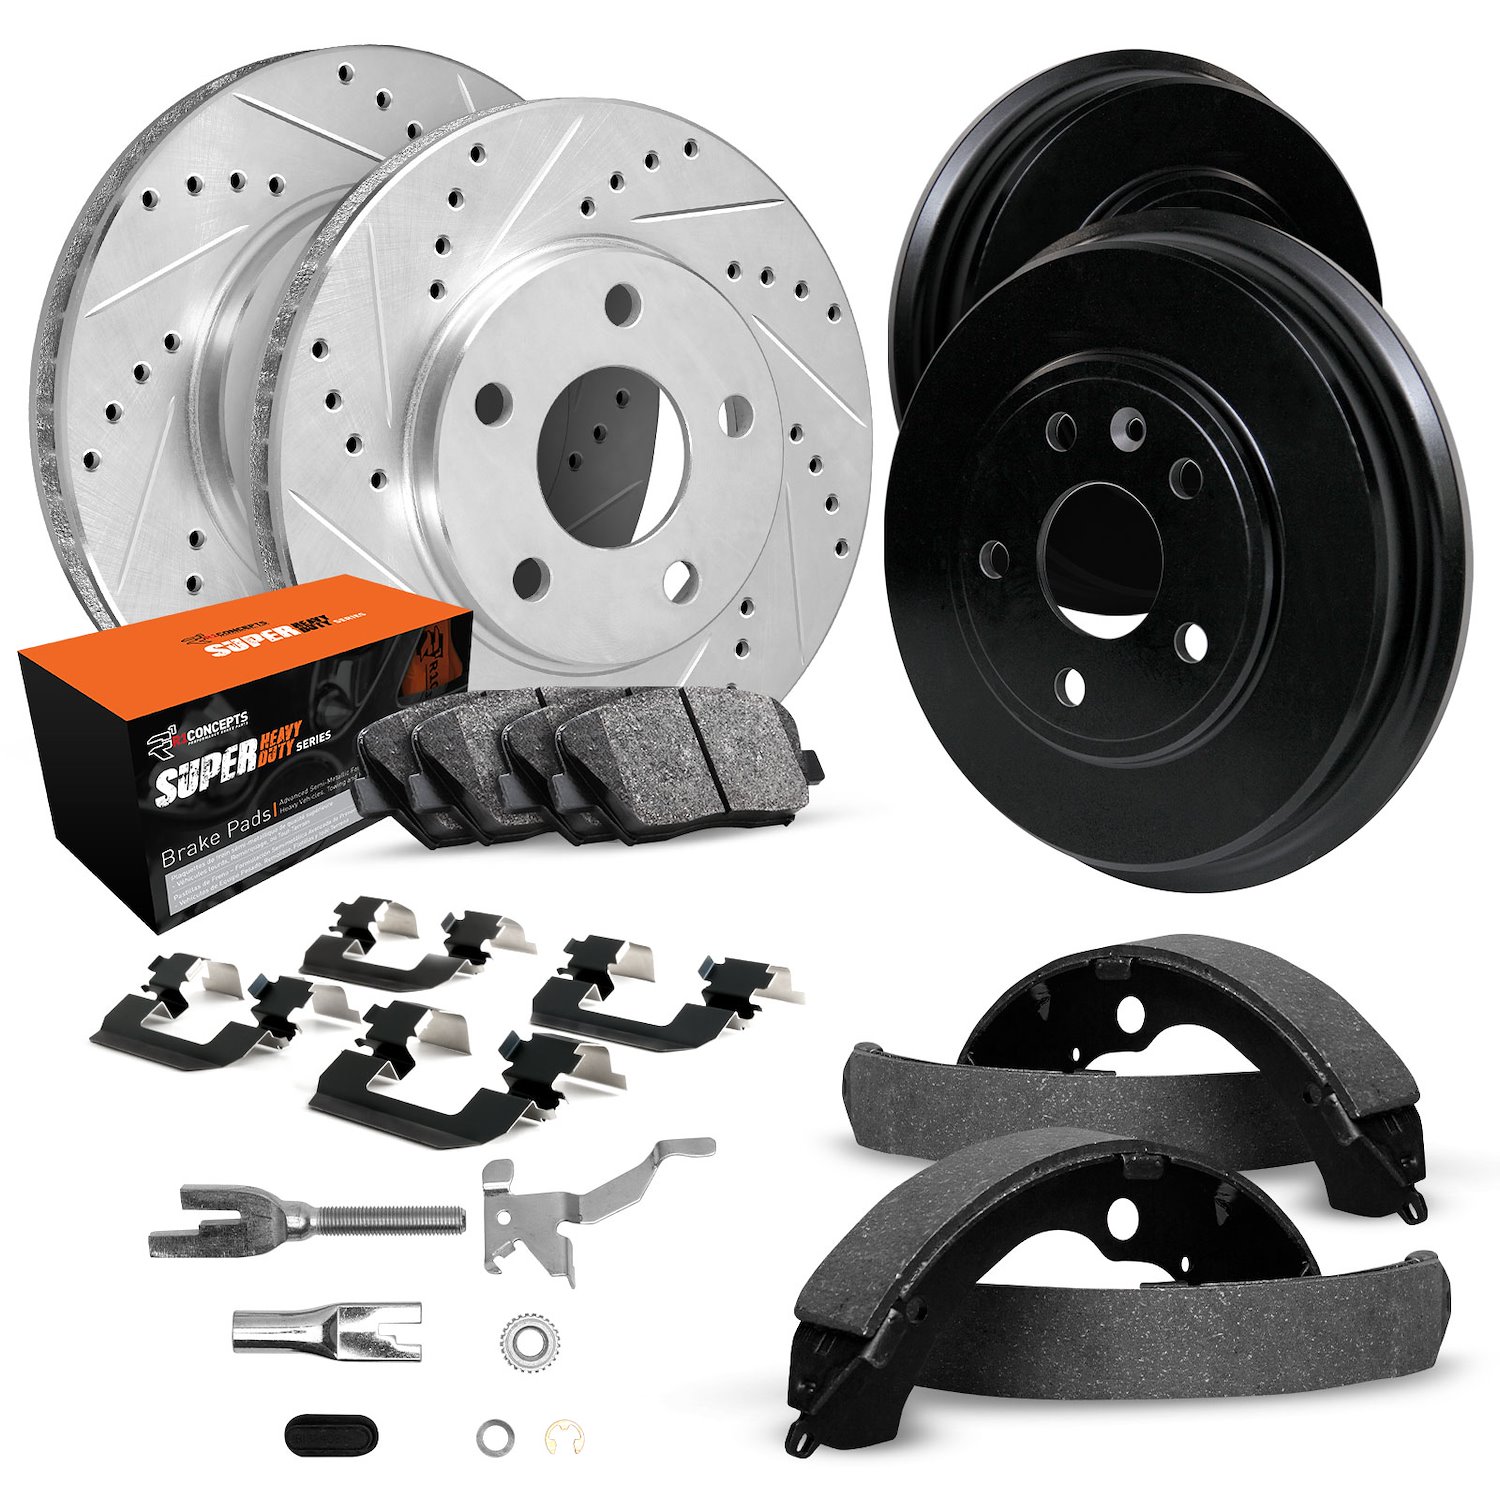 E-Line Drilled/Slotted Silver Rotor & Drum Set w/Super-Duty Pads, Shoes/Hardware/Adjusters, 1976-1978 Mopar